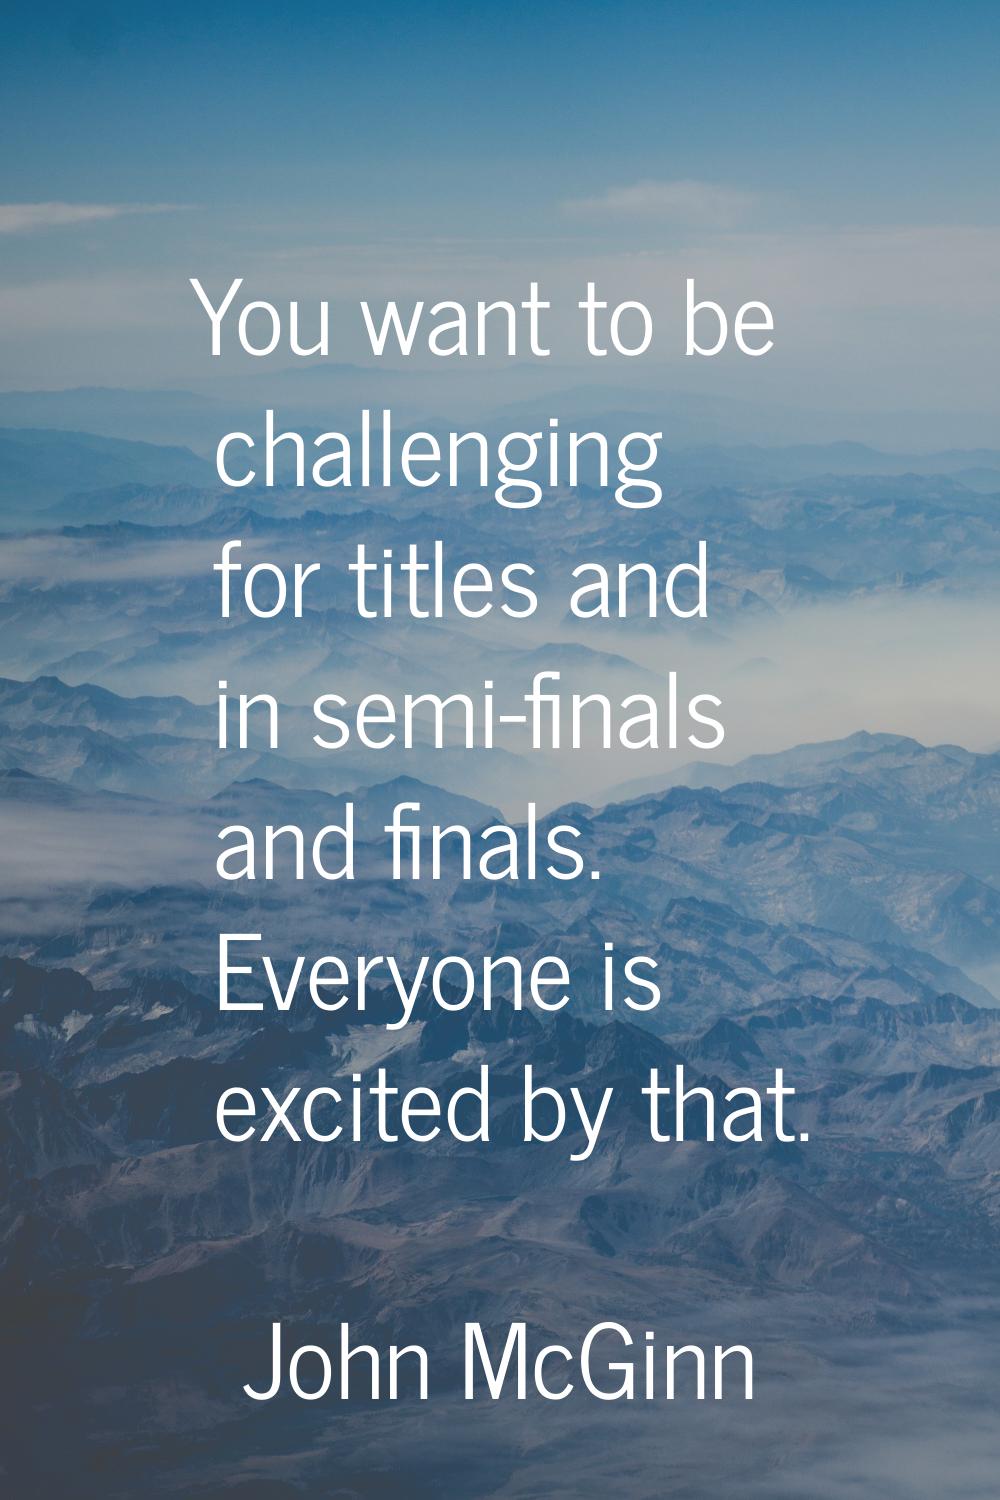 You want to be challenging for titles and in semi-finals and finals. Everyone is excited by that.